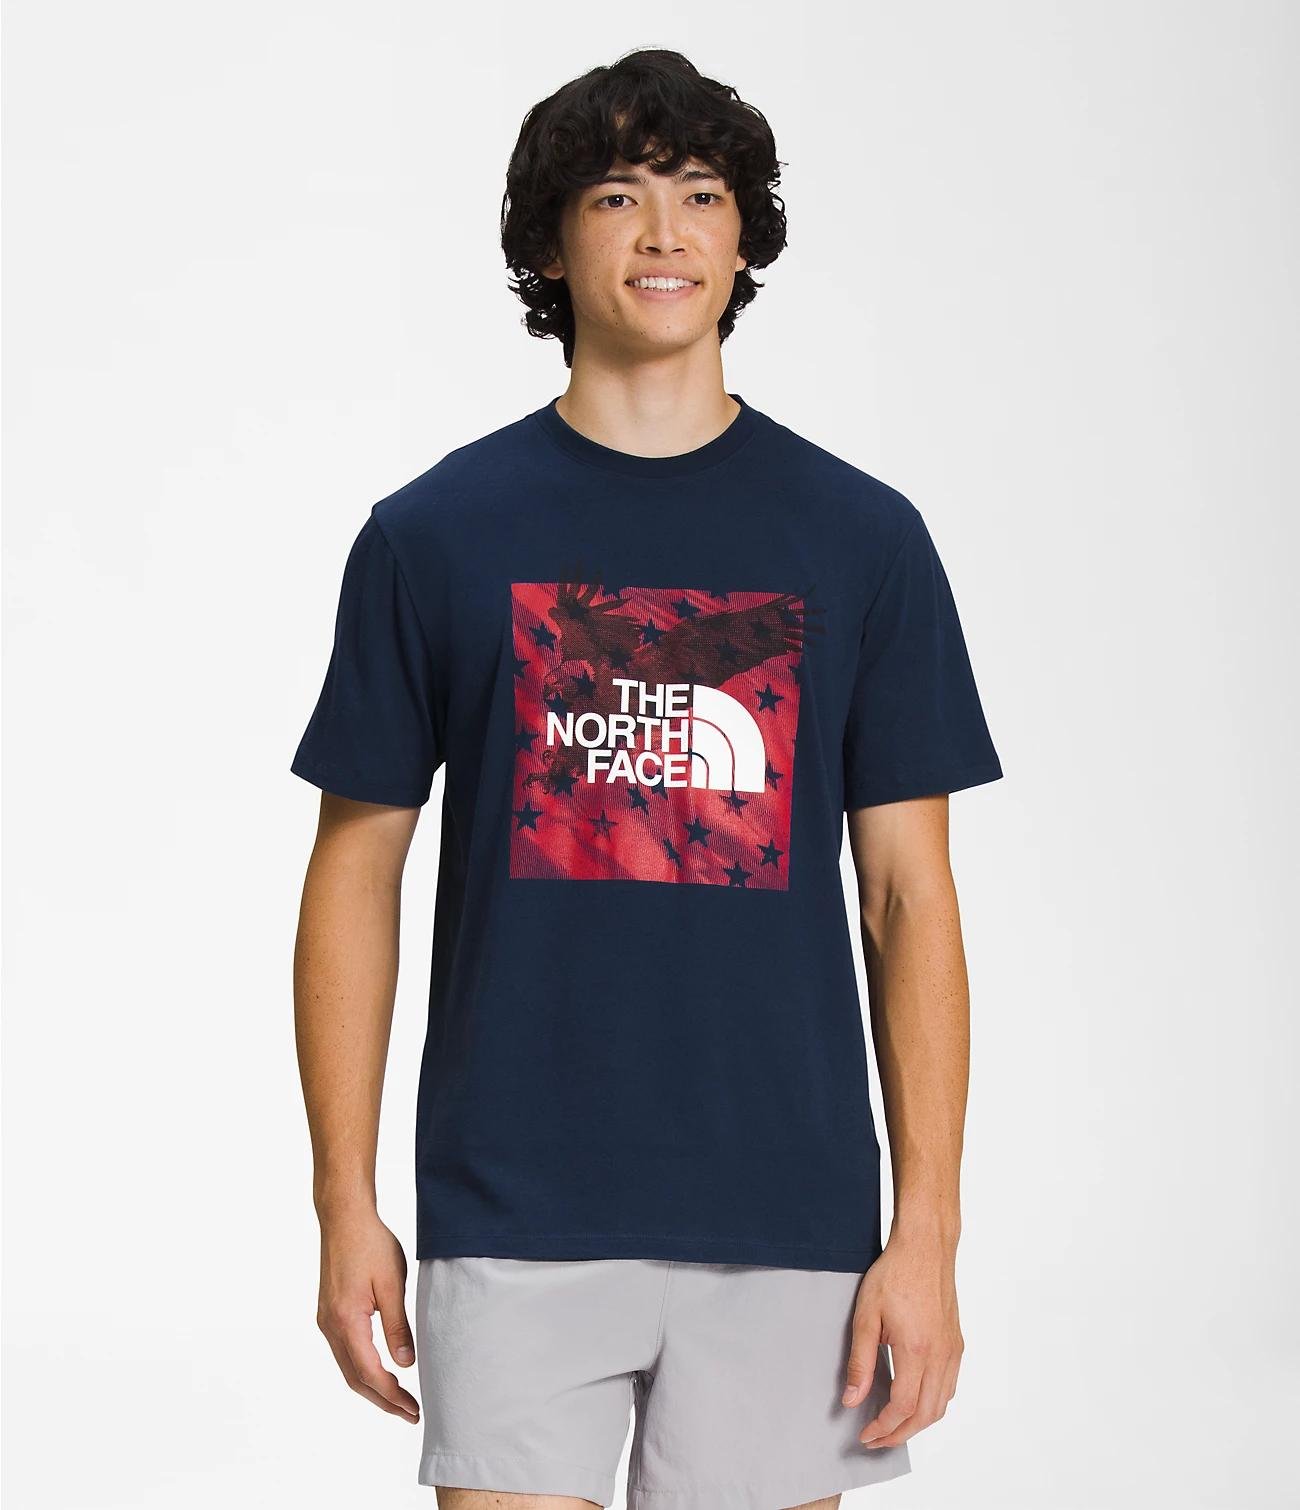 Men’s Short-Sleeve Americana Tee by THE NORTH FACE